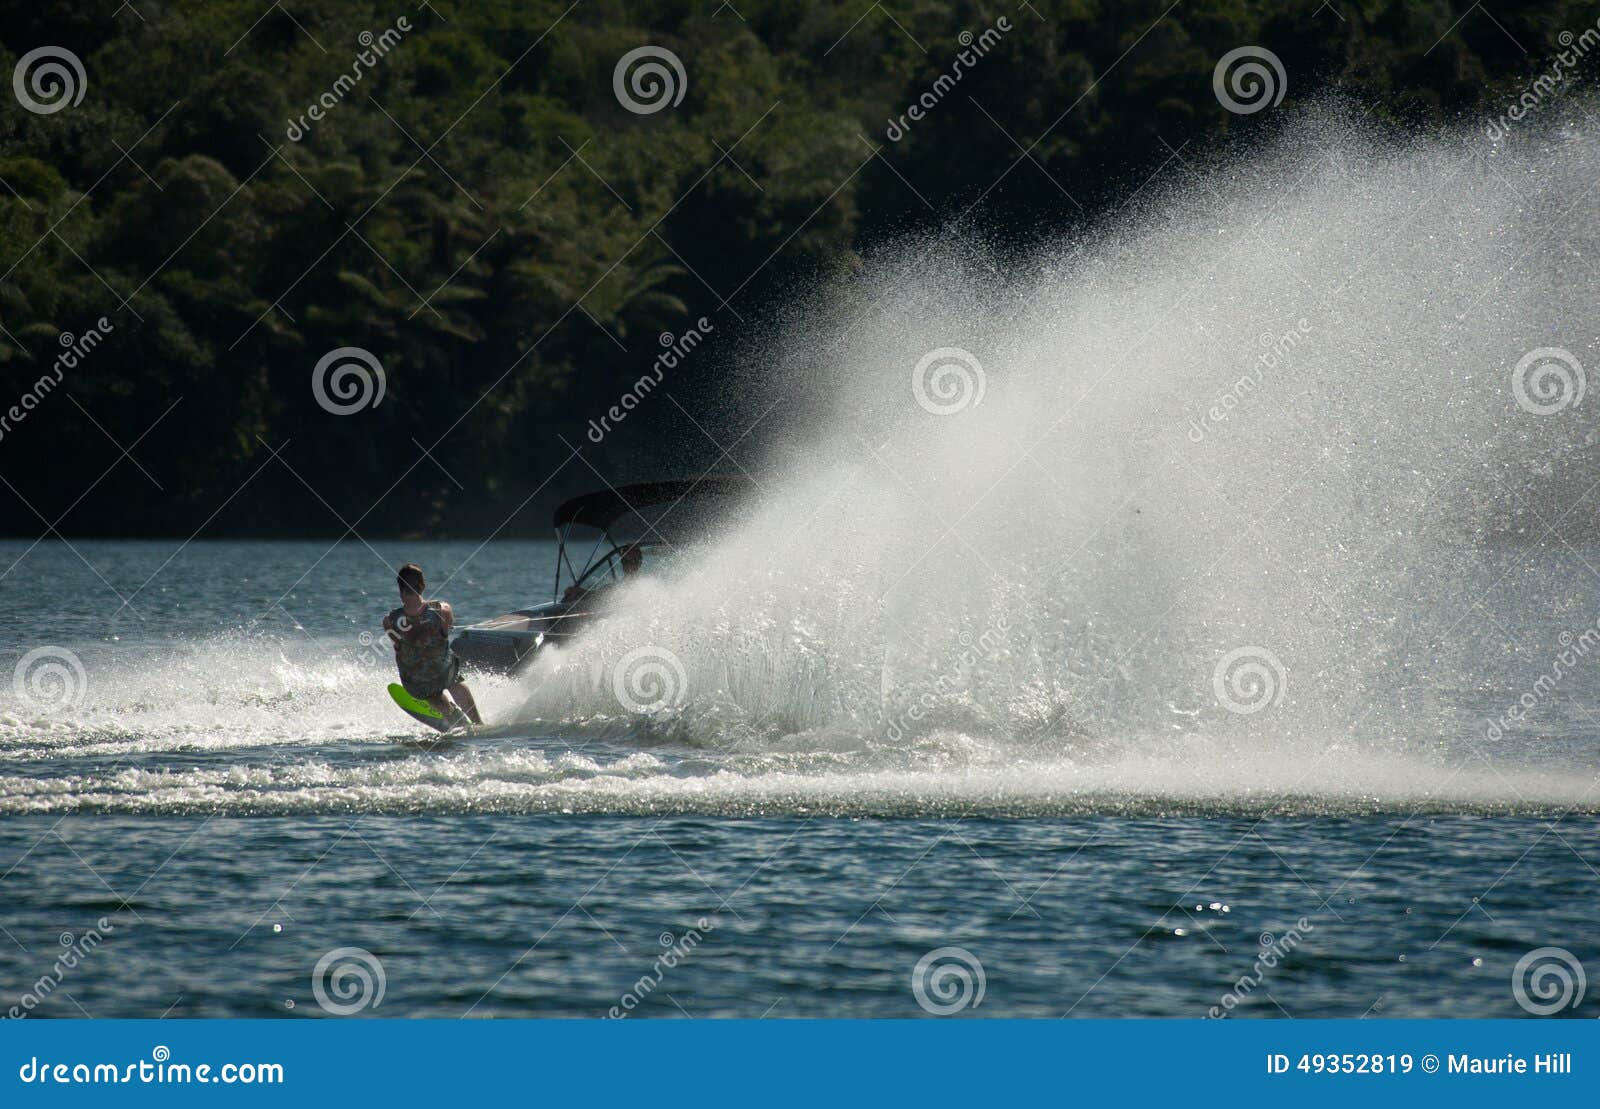 Water Skiing Slalom Action Skier Single Ski Waterskier Rounding Ball Course Throws Up Huge Wall Spray 49352819 